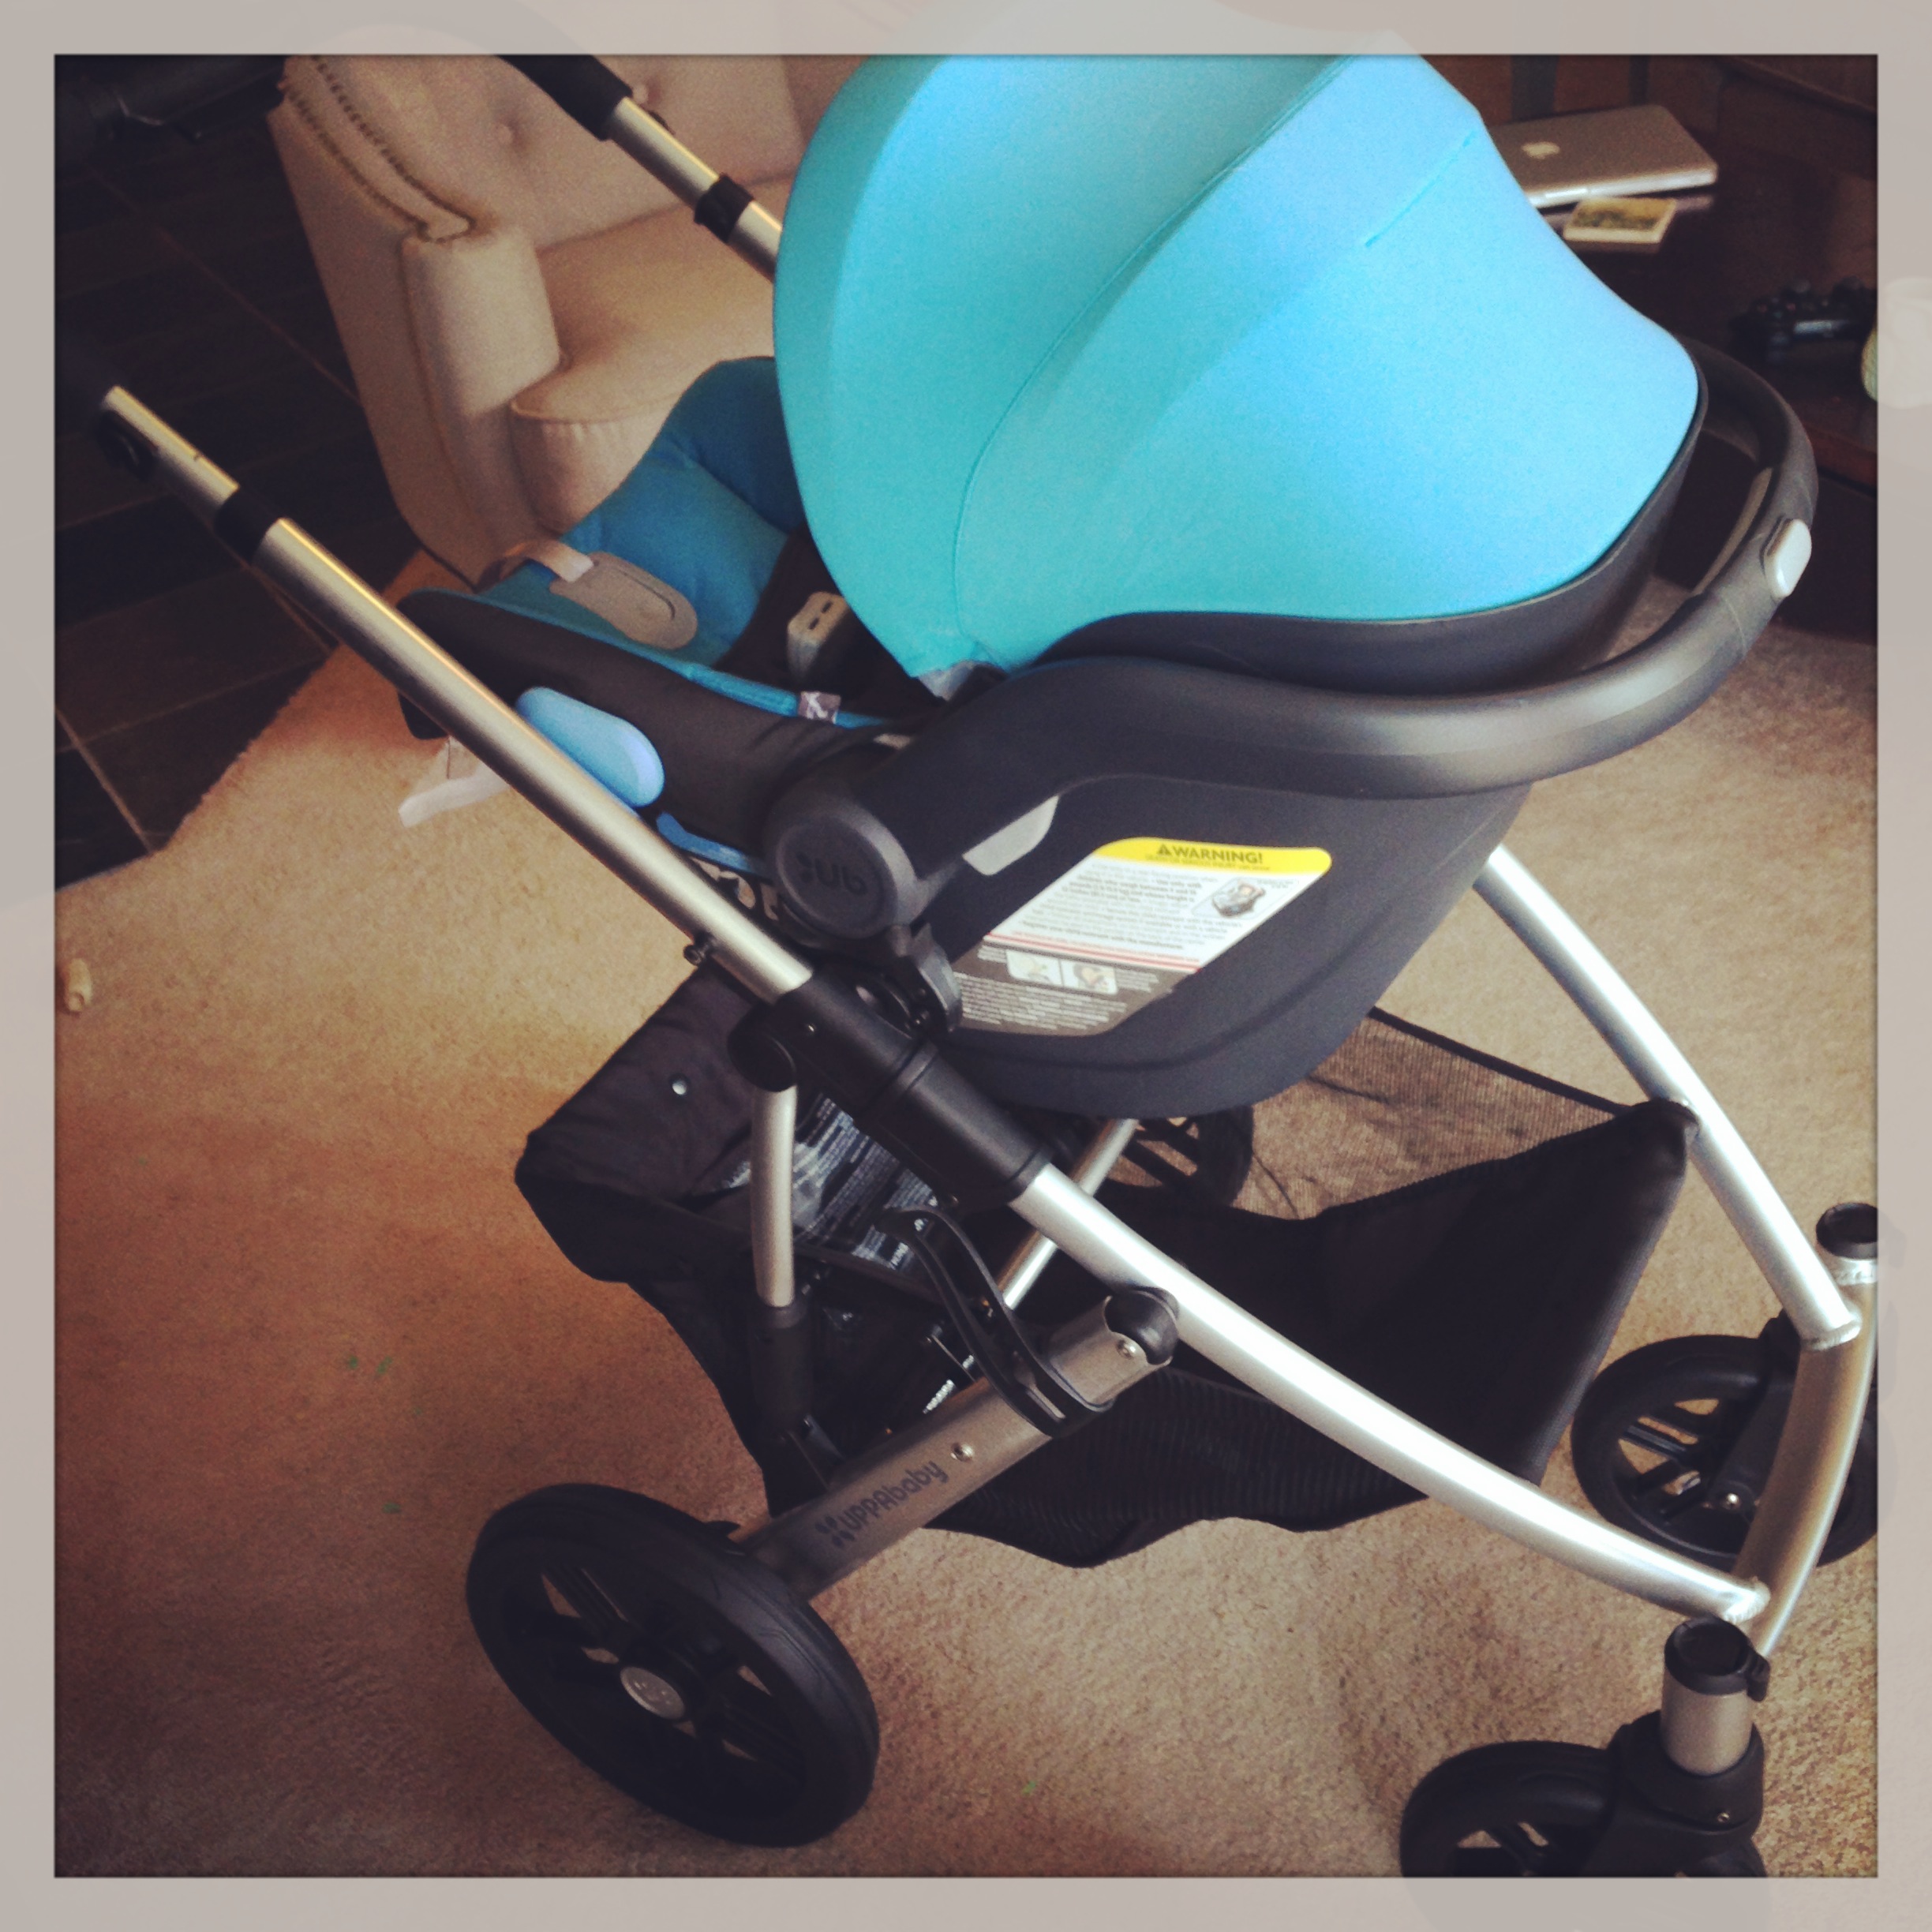 infant car seat compatible with uppababy cruz